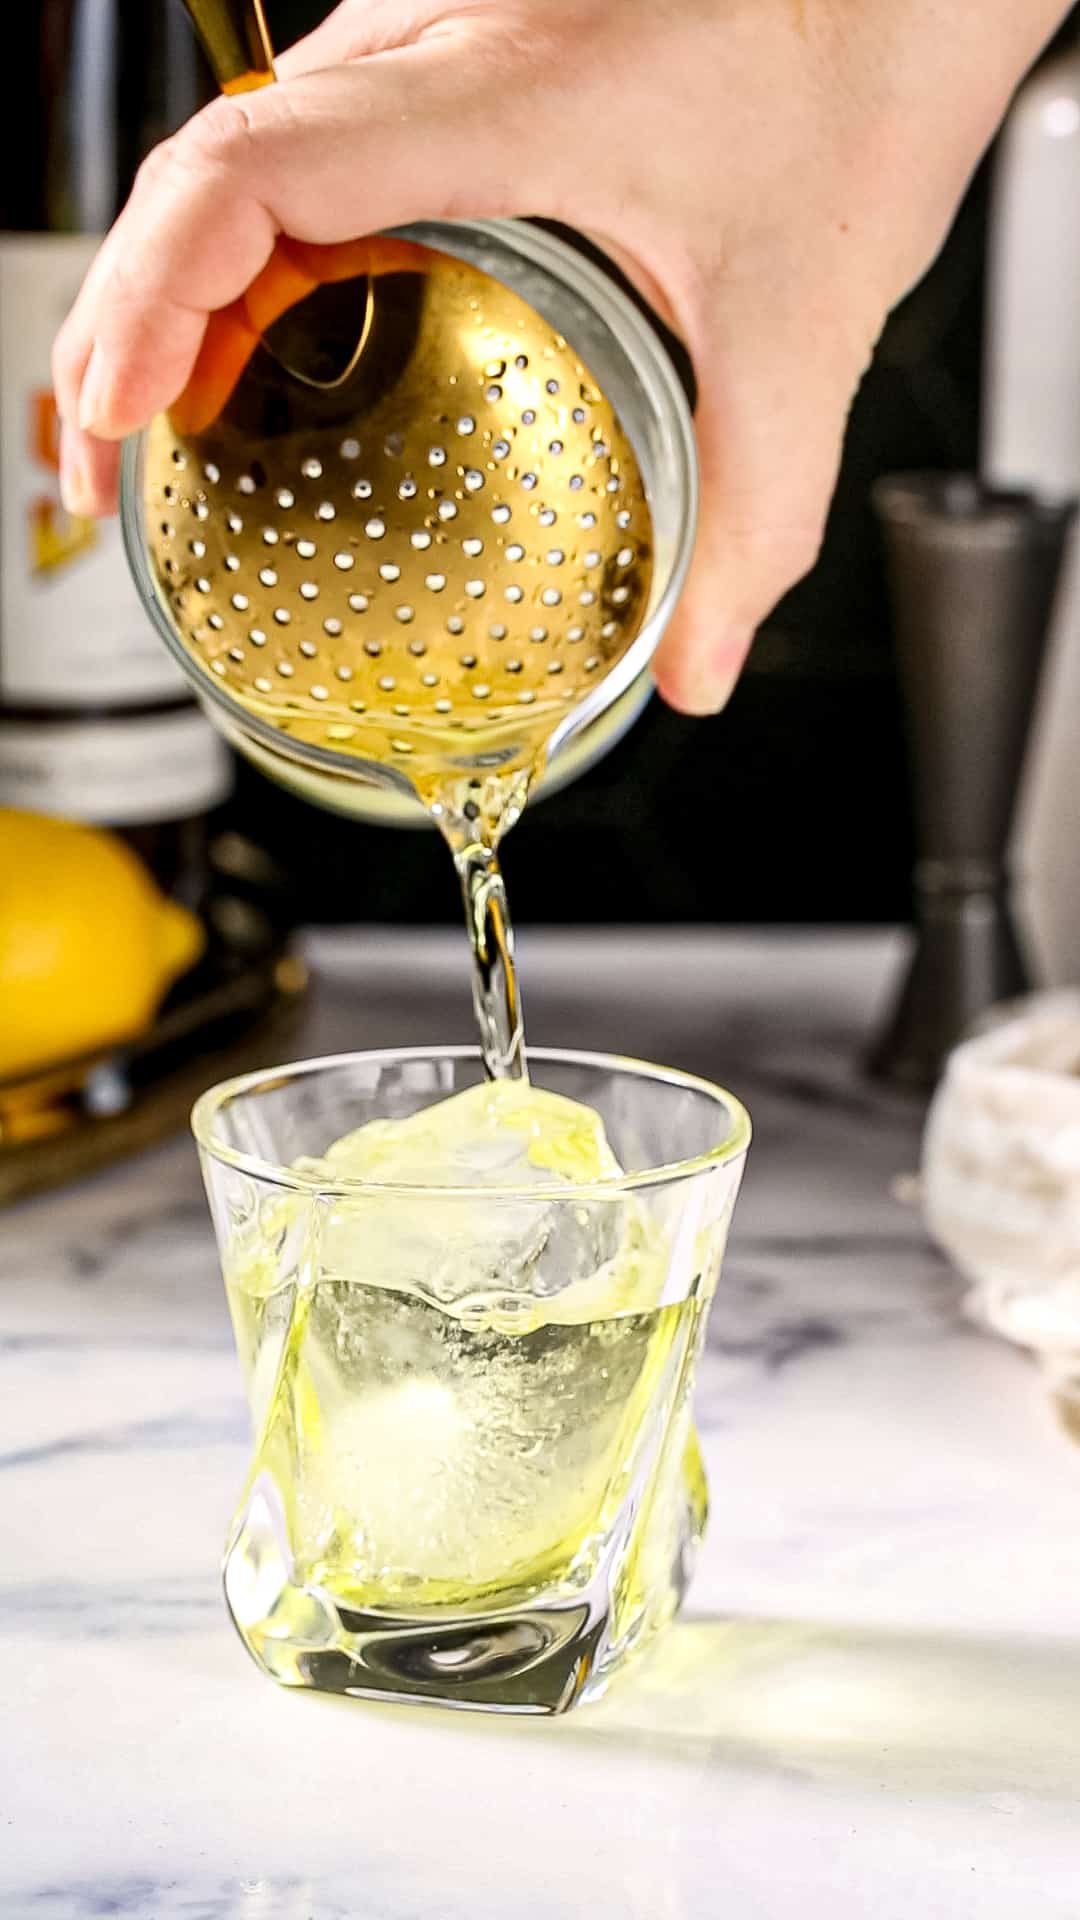 Hand using a Julep strainer to strain a yellow colored cocktail into the serving glass.